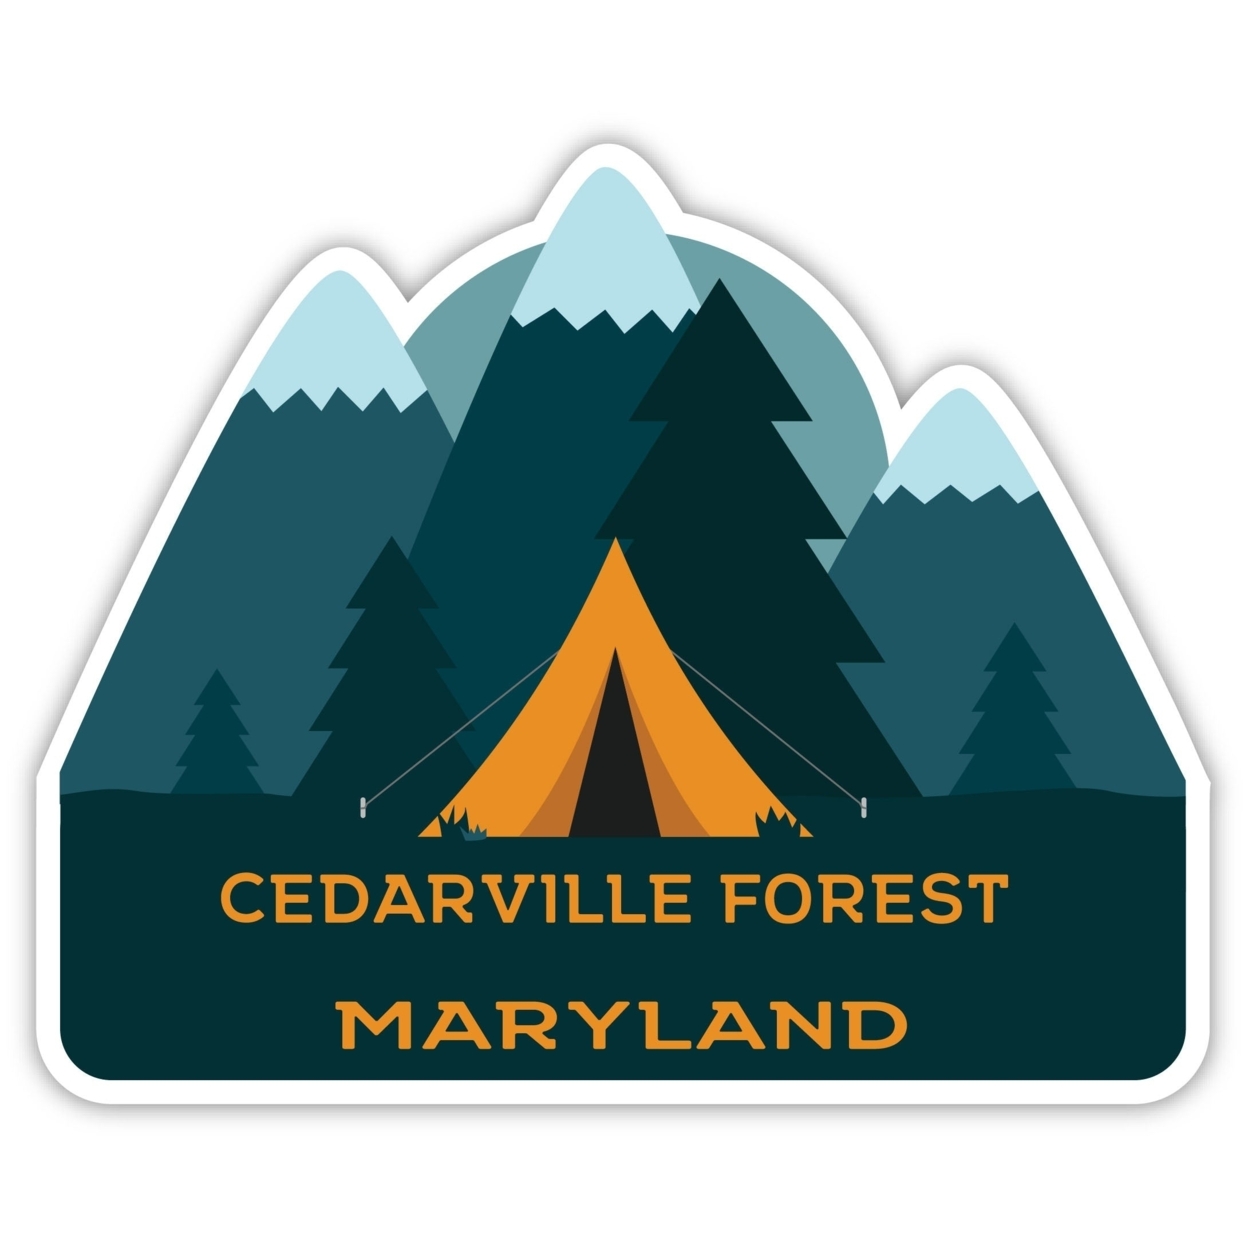 Cedarville Forest Maryland Souvenir Decorative Stickers (Choose Theme And Size) - Single Unit, 12-Inch, Tent